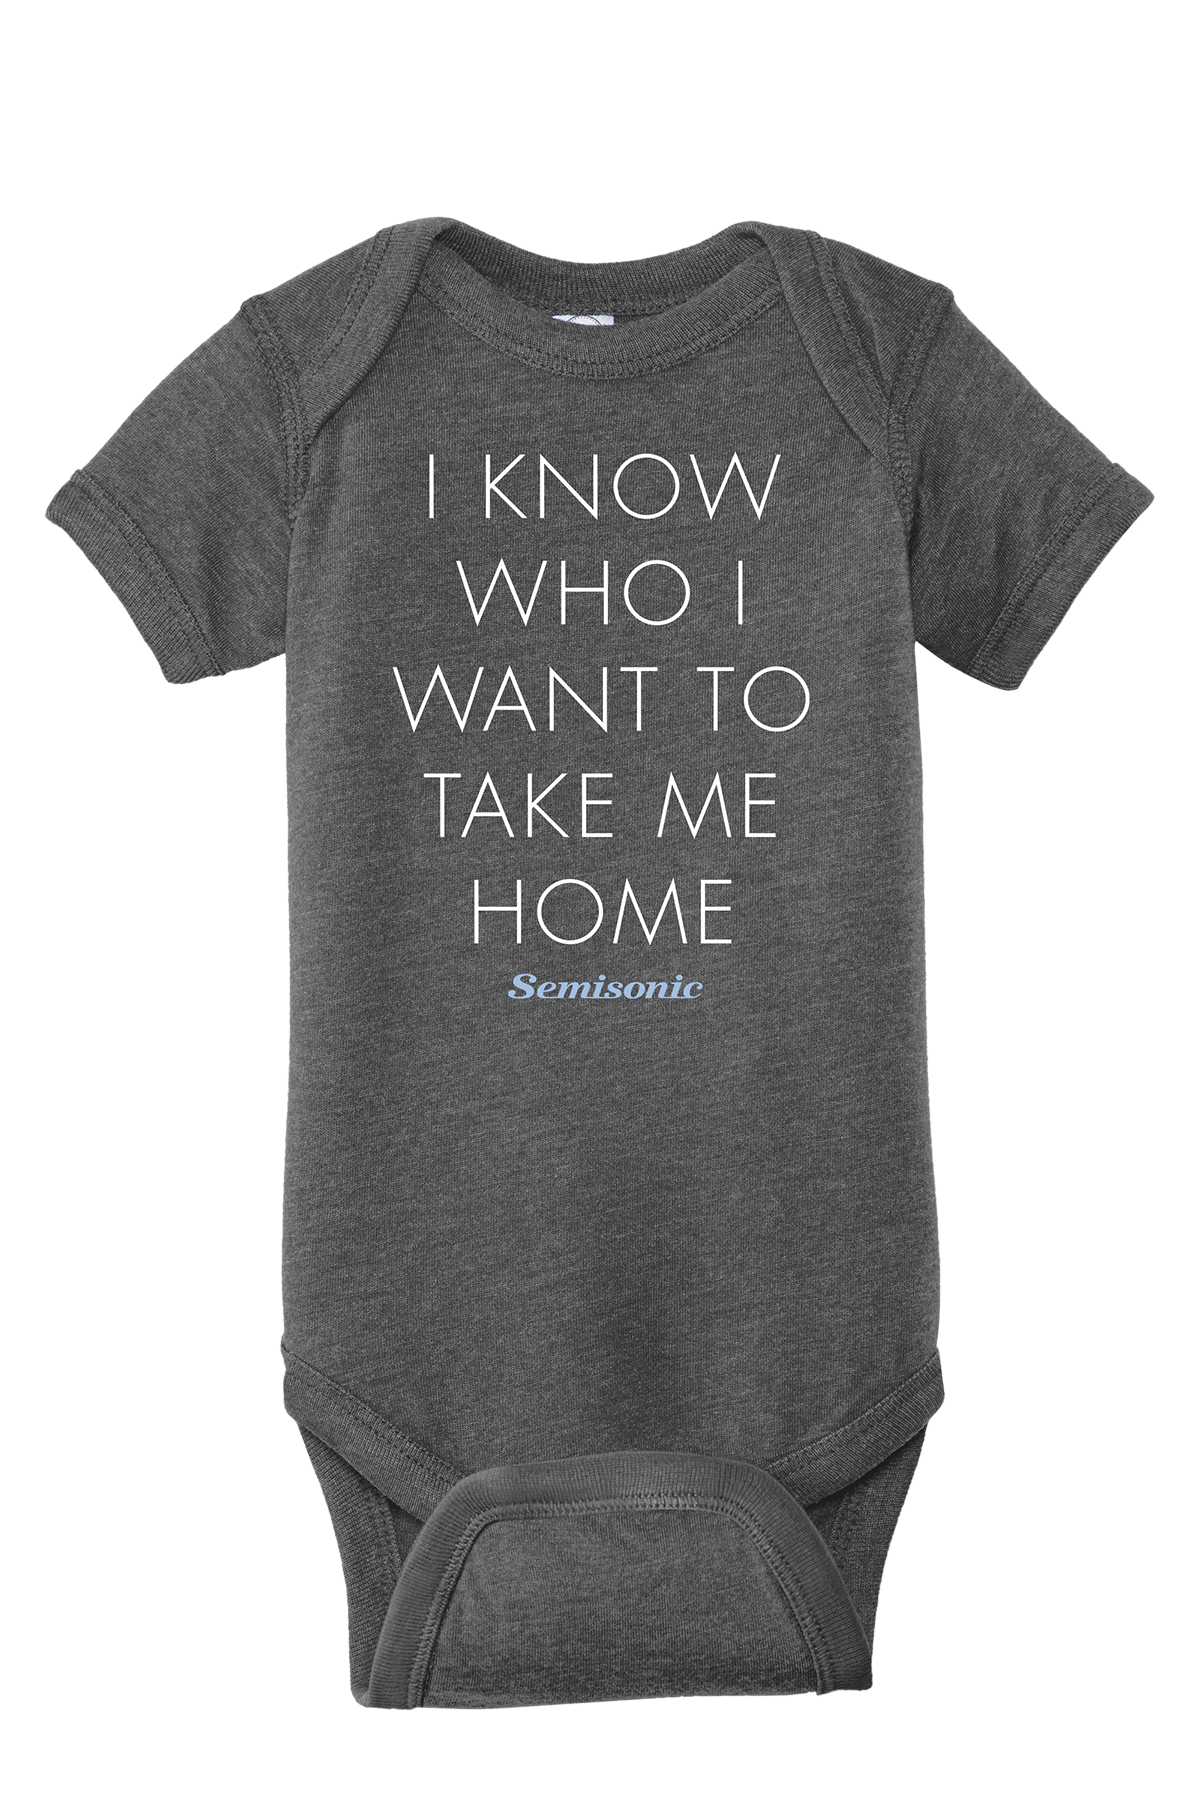 I Know Who I Want To Take Me Home Onesie - Unisex